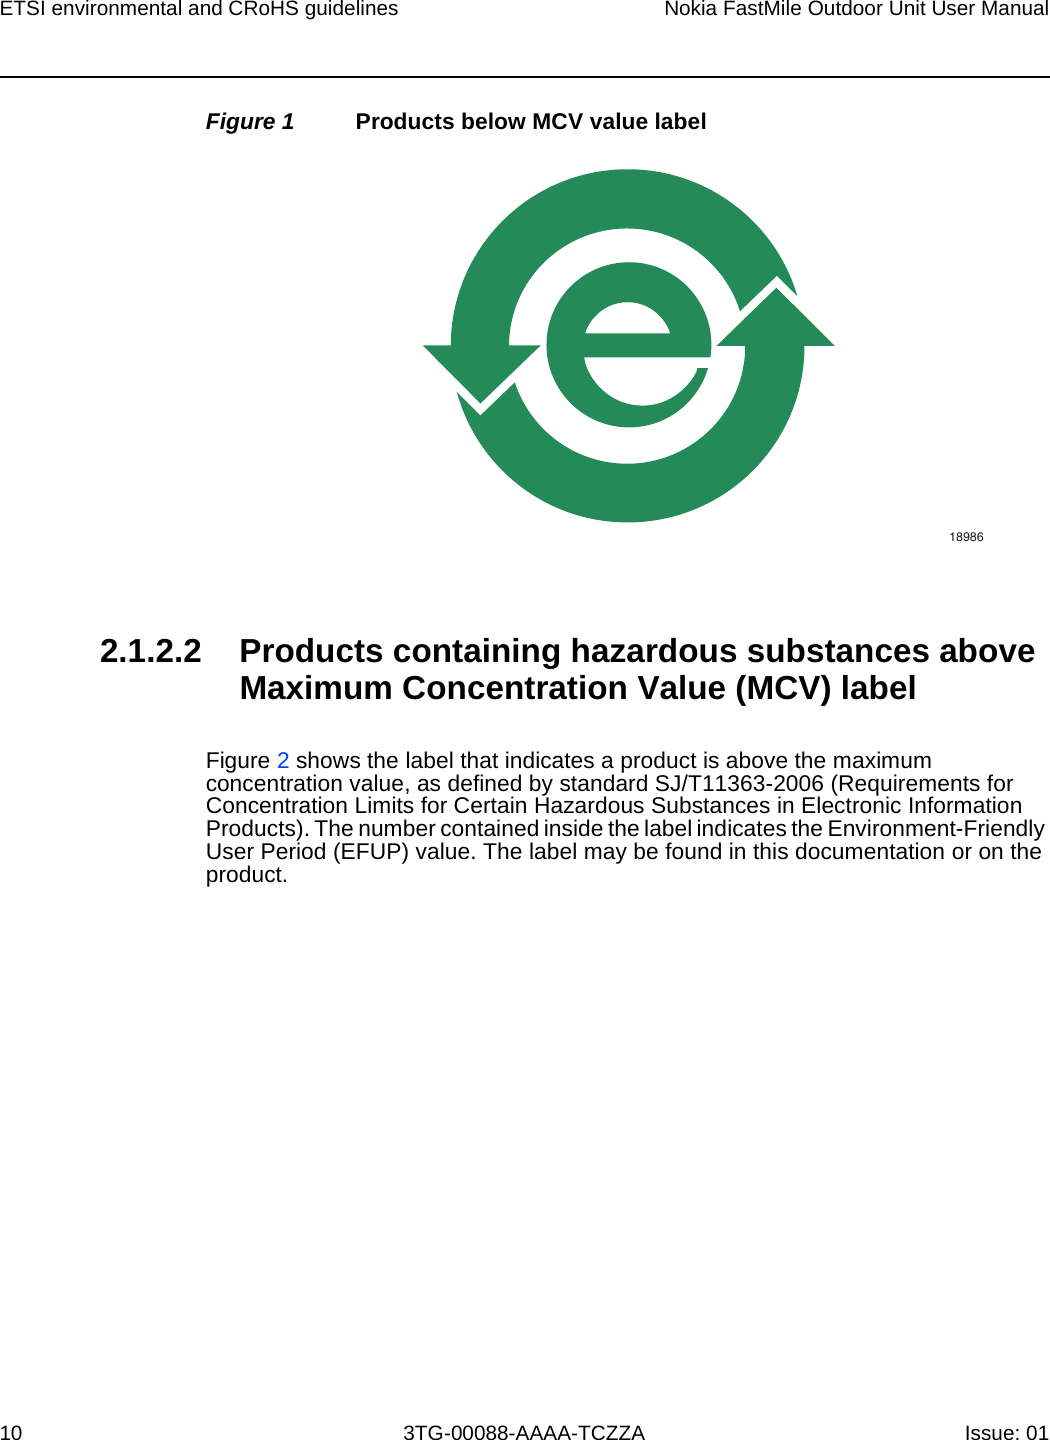 ETSI environmental and CRoHS guidelines10Nokia FastMile Outdoor Unit User Manual3TG-00088-AAAA-TCZZA Issue: 01 Figure 1 Products below MCV value label2.1.2.2 Products containing hazardous substances above Maximum Concentration Value (MCV) labelFigure 2 shows the label that indicates a product is above the maximum concentration value, as defined by standard SJ/T11363-2006 (Requirements for Concentration Limits for Certain Hazardous Substances in Electronic Information Products). The number contained inside the label indicates the Environment-Friendly User Period (EFUP) value. The label may be found in this documentation or on the product.18986